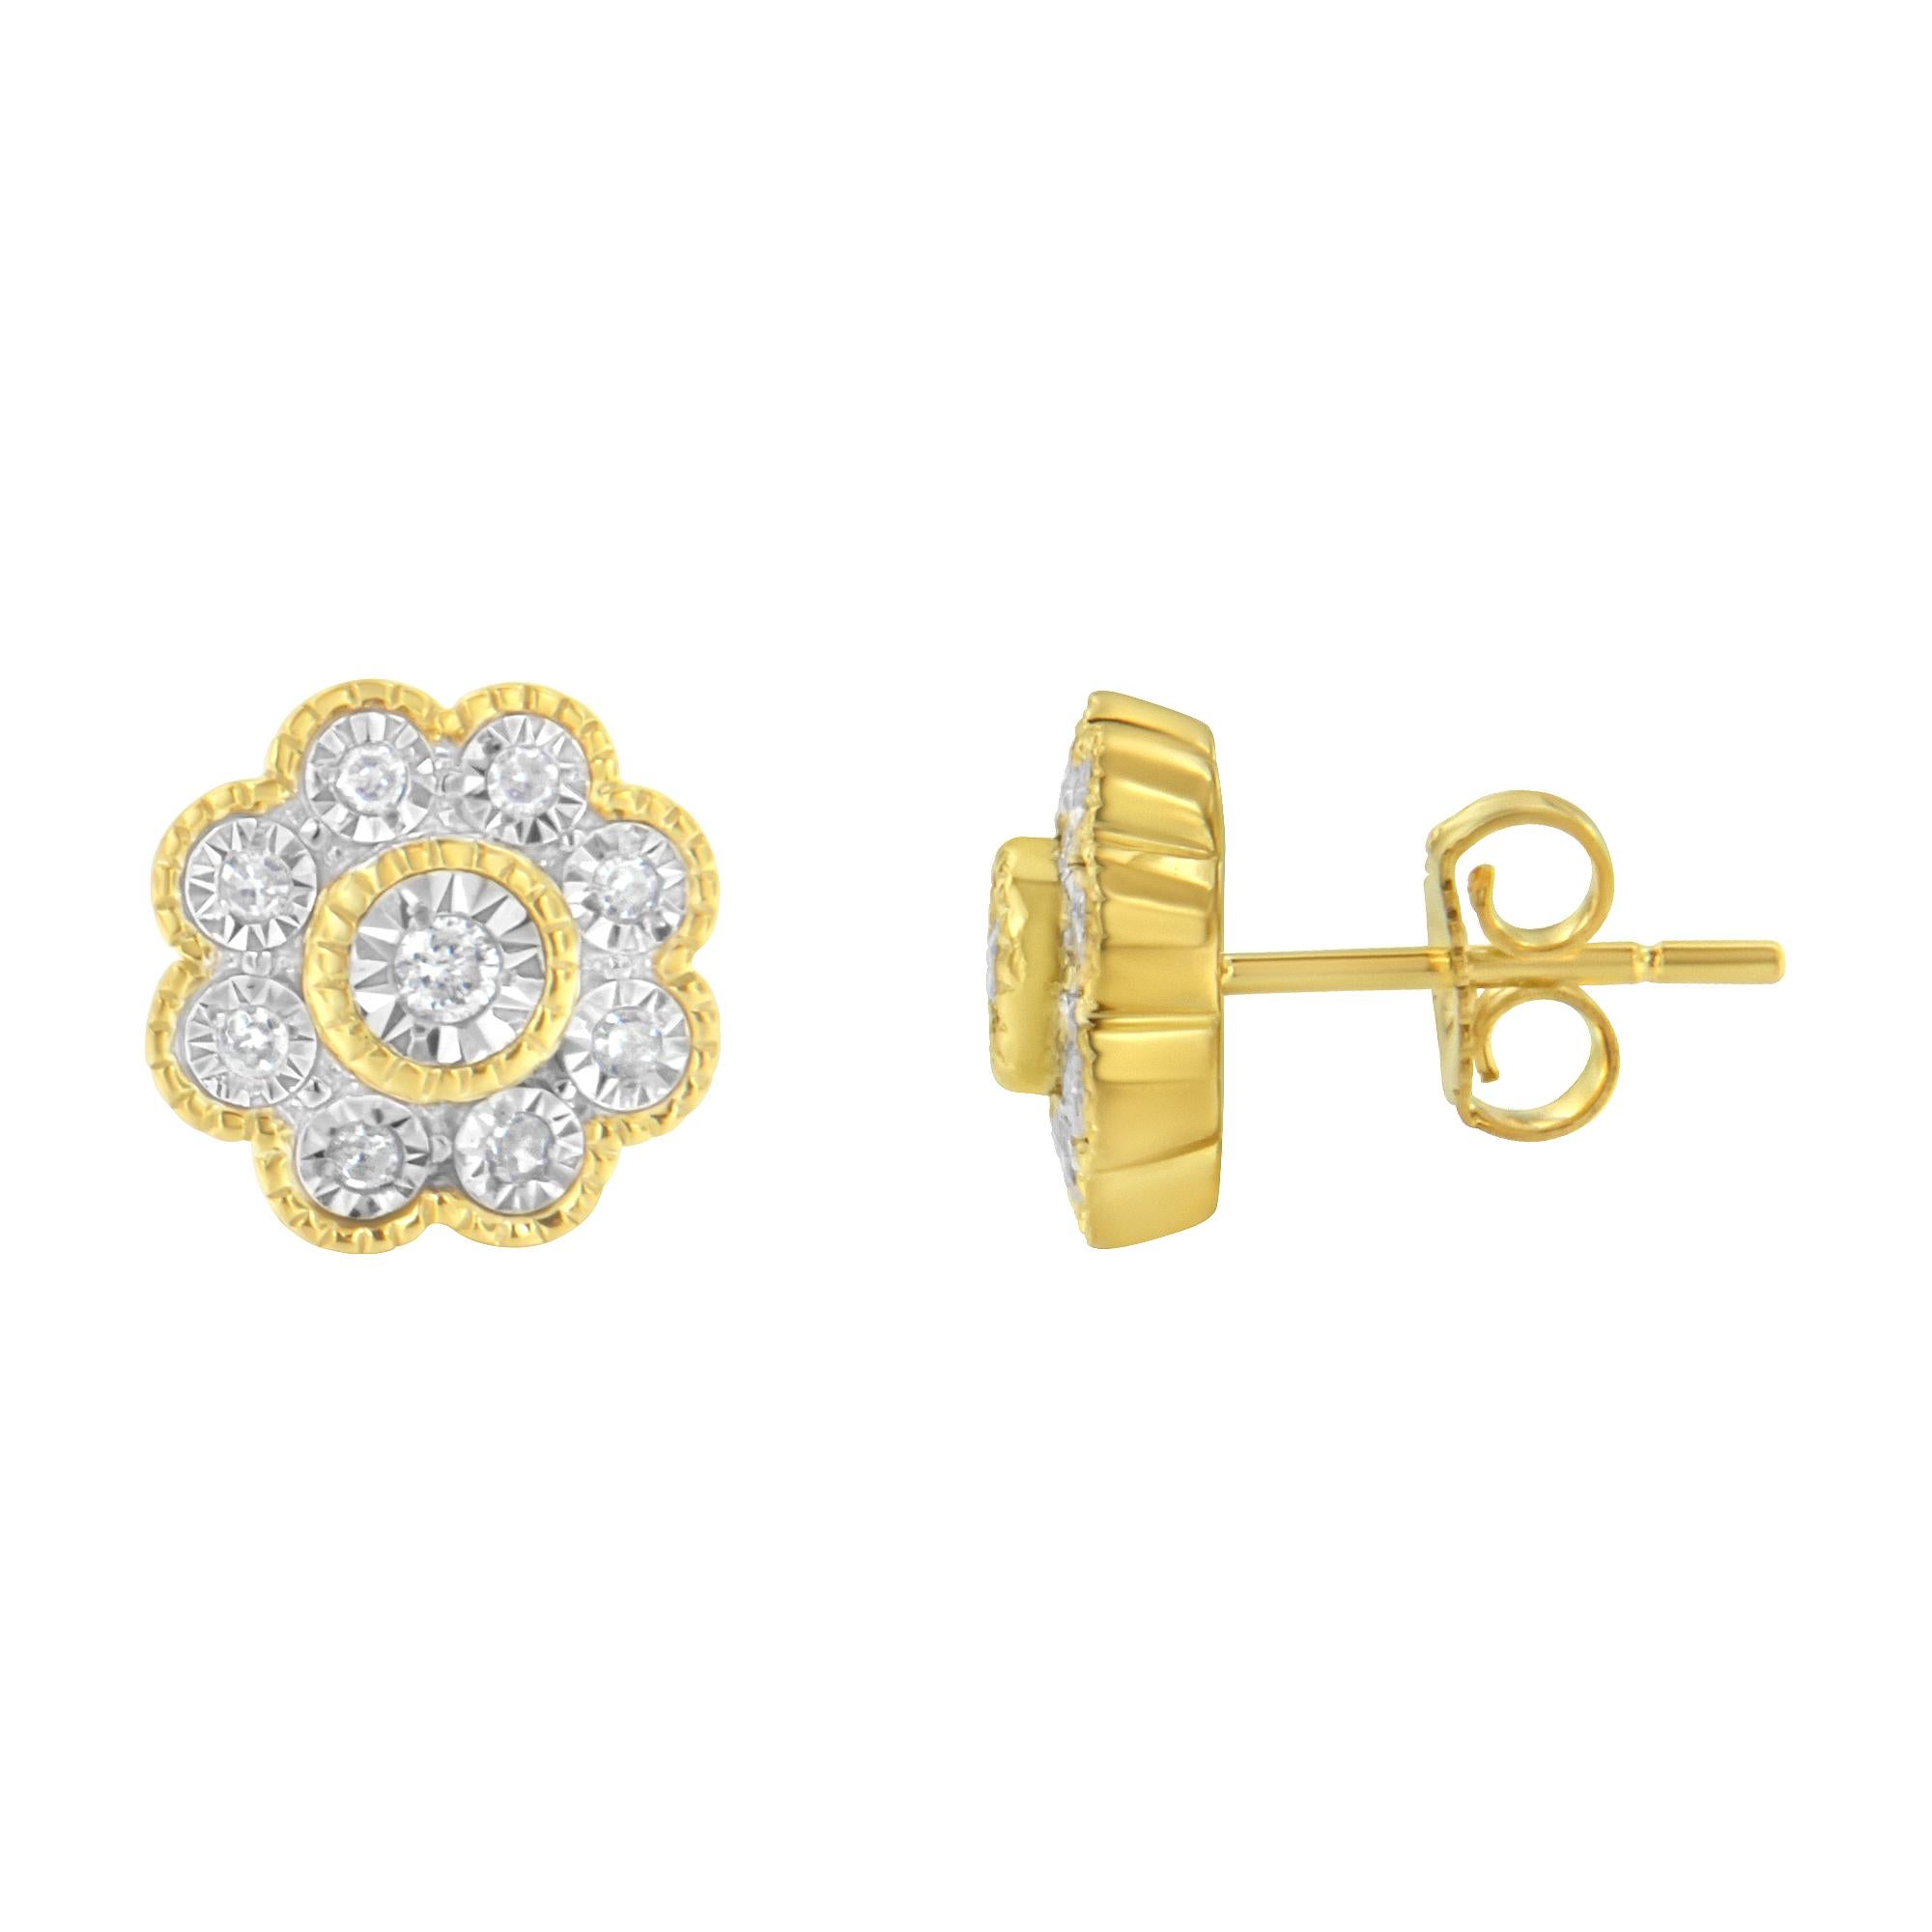 Beautiful and elegant, these 14k yellow gold plated sterling silver stud earrings feature a nature inspired design. Miracle set diamonds are arranged to create a floral design. A yellow gold beaded ribbon wraps around the central diamond as well as